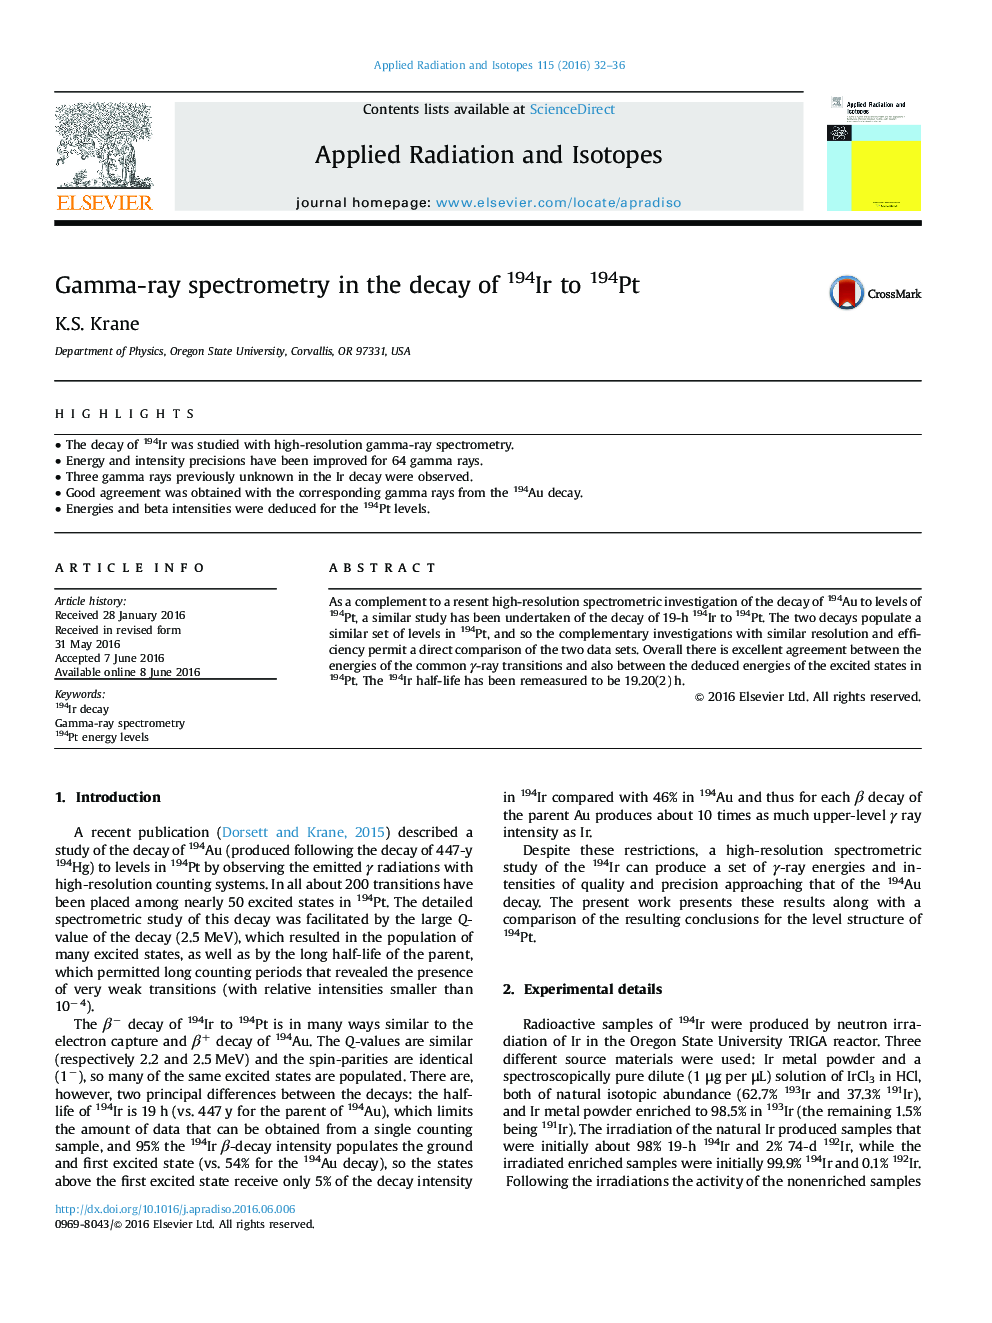 Gamma-ray spectrometry in the decay of 194Ir to 194Pt